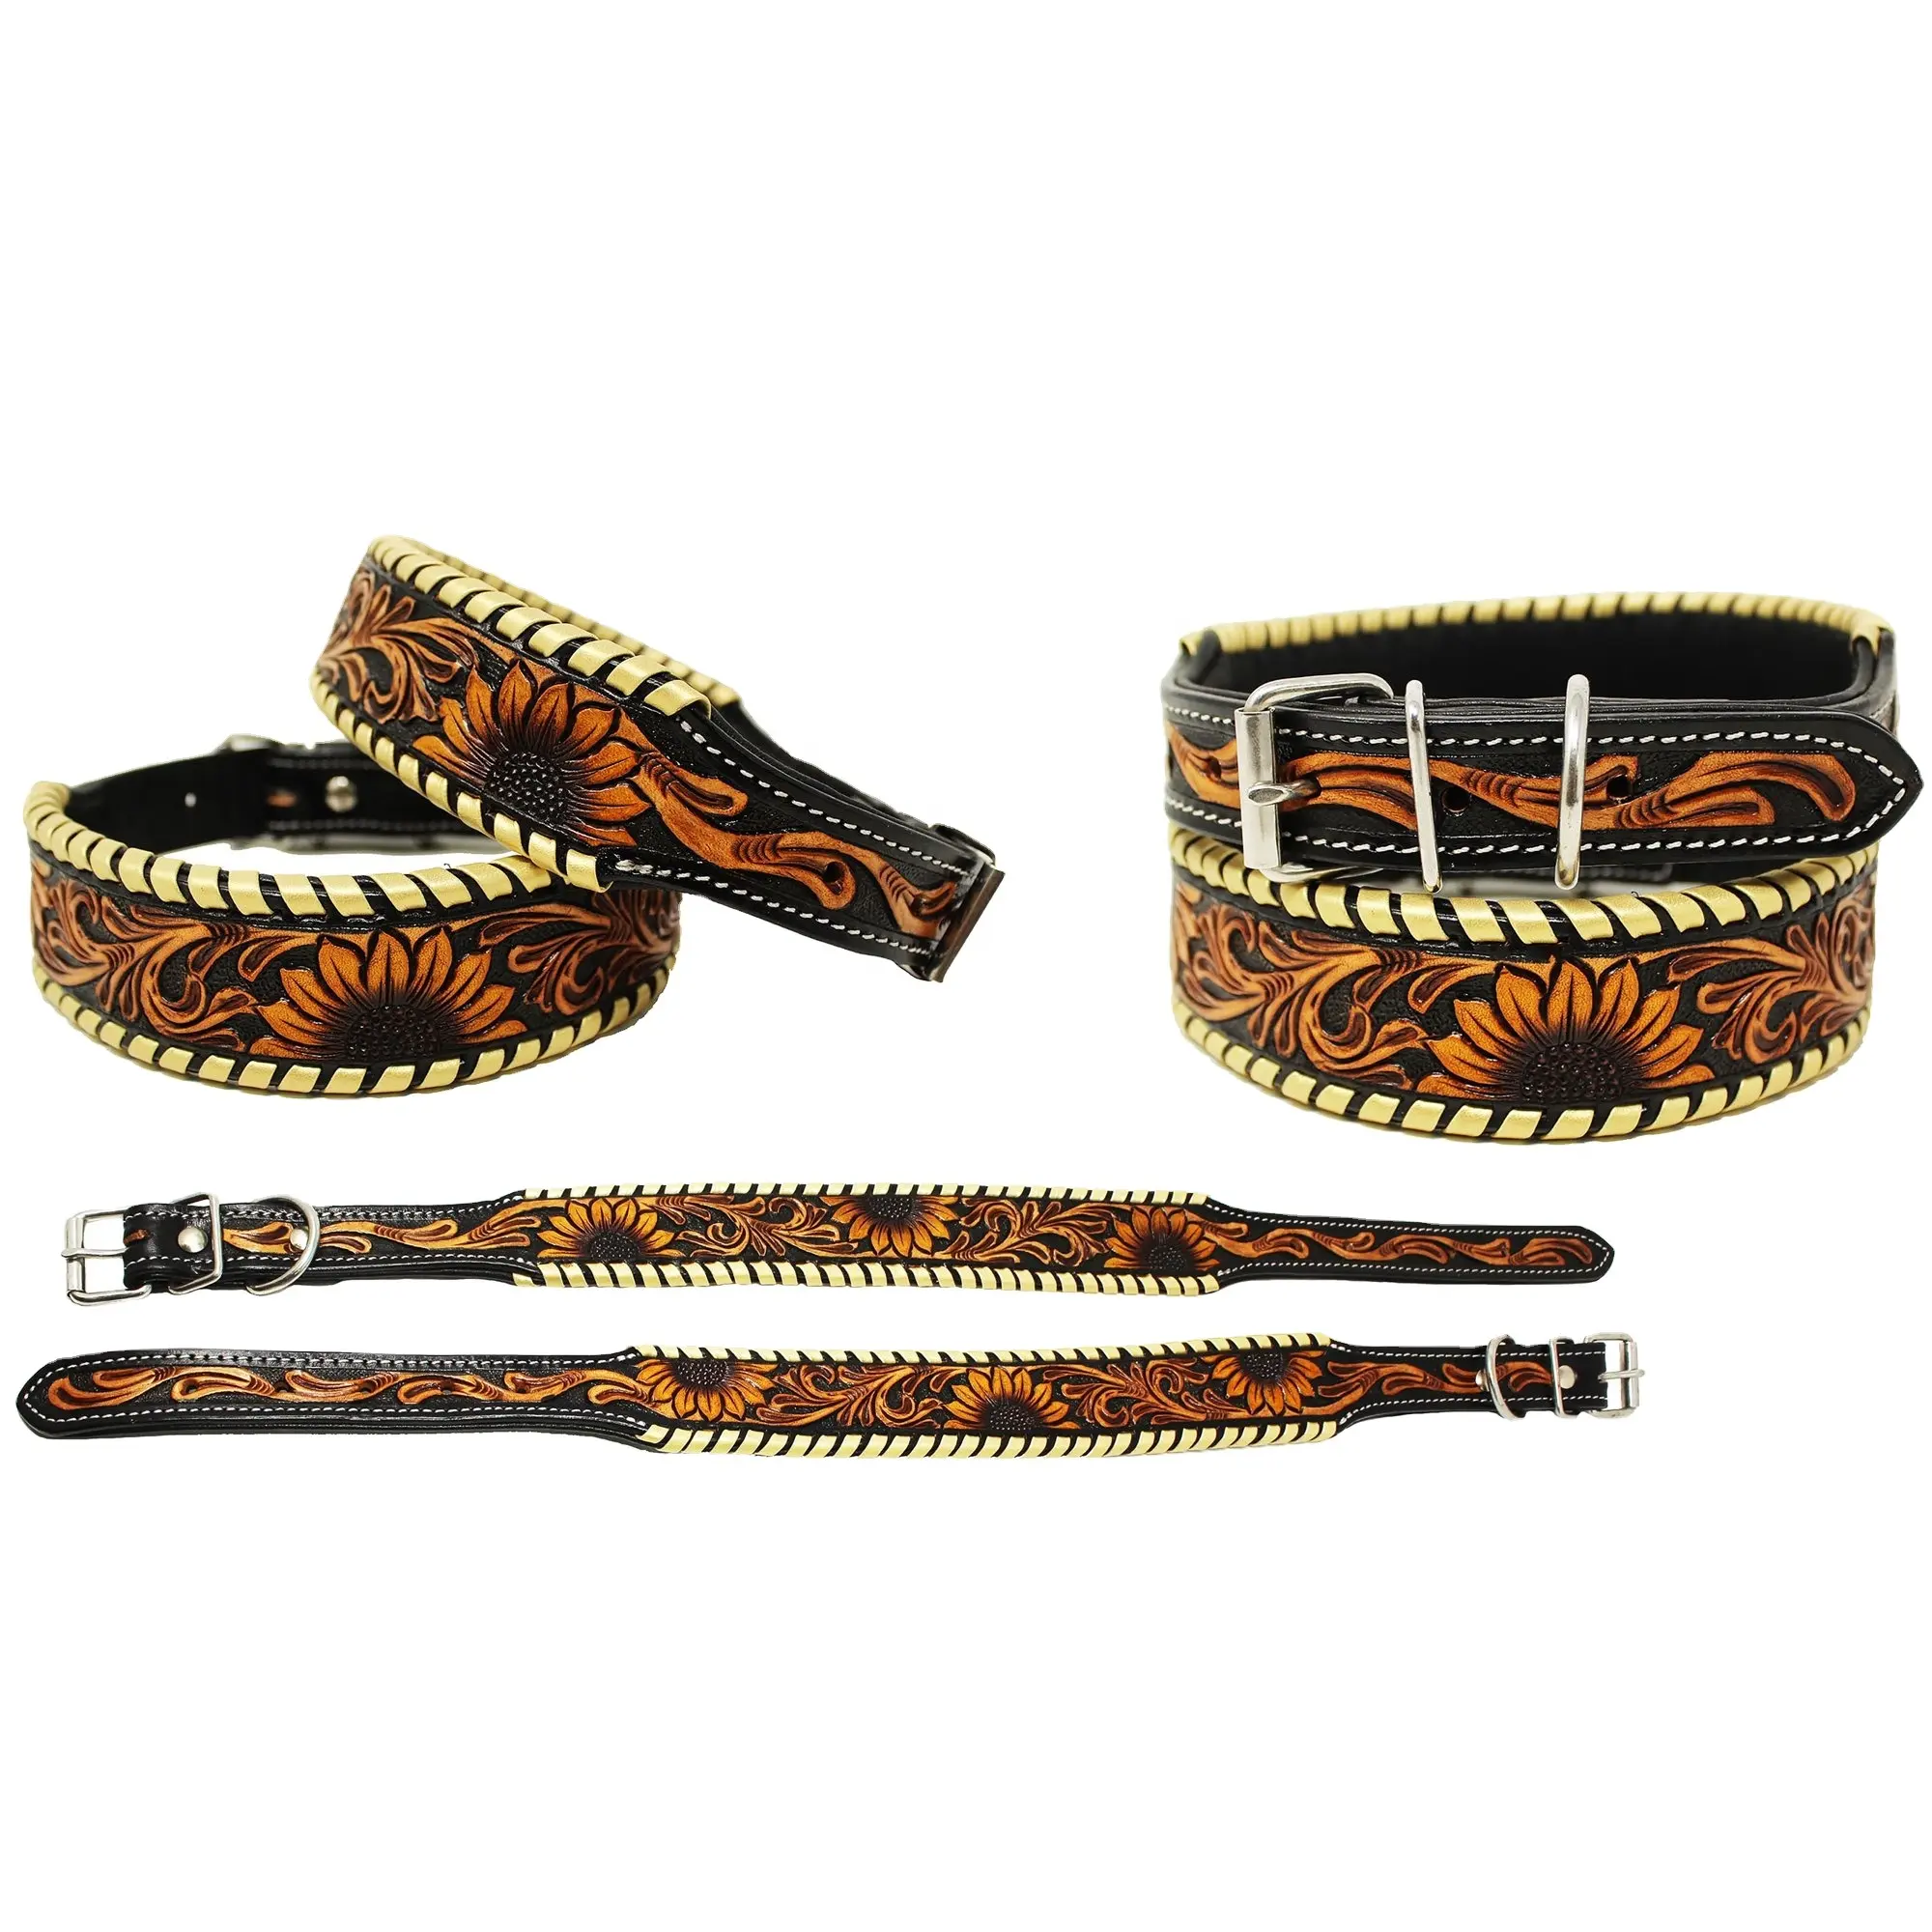 High Quality Leather Soft Padded Dog Collars With Sunflower Hand Tooled Design Size Available For Pet Dog Uses Low Prices